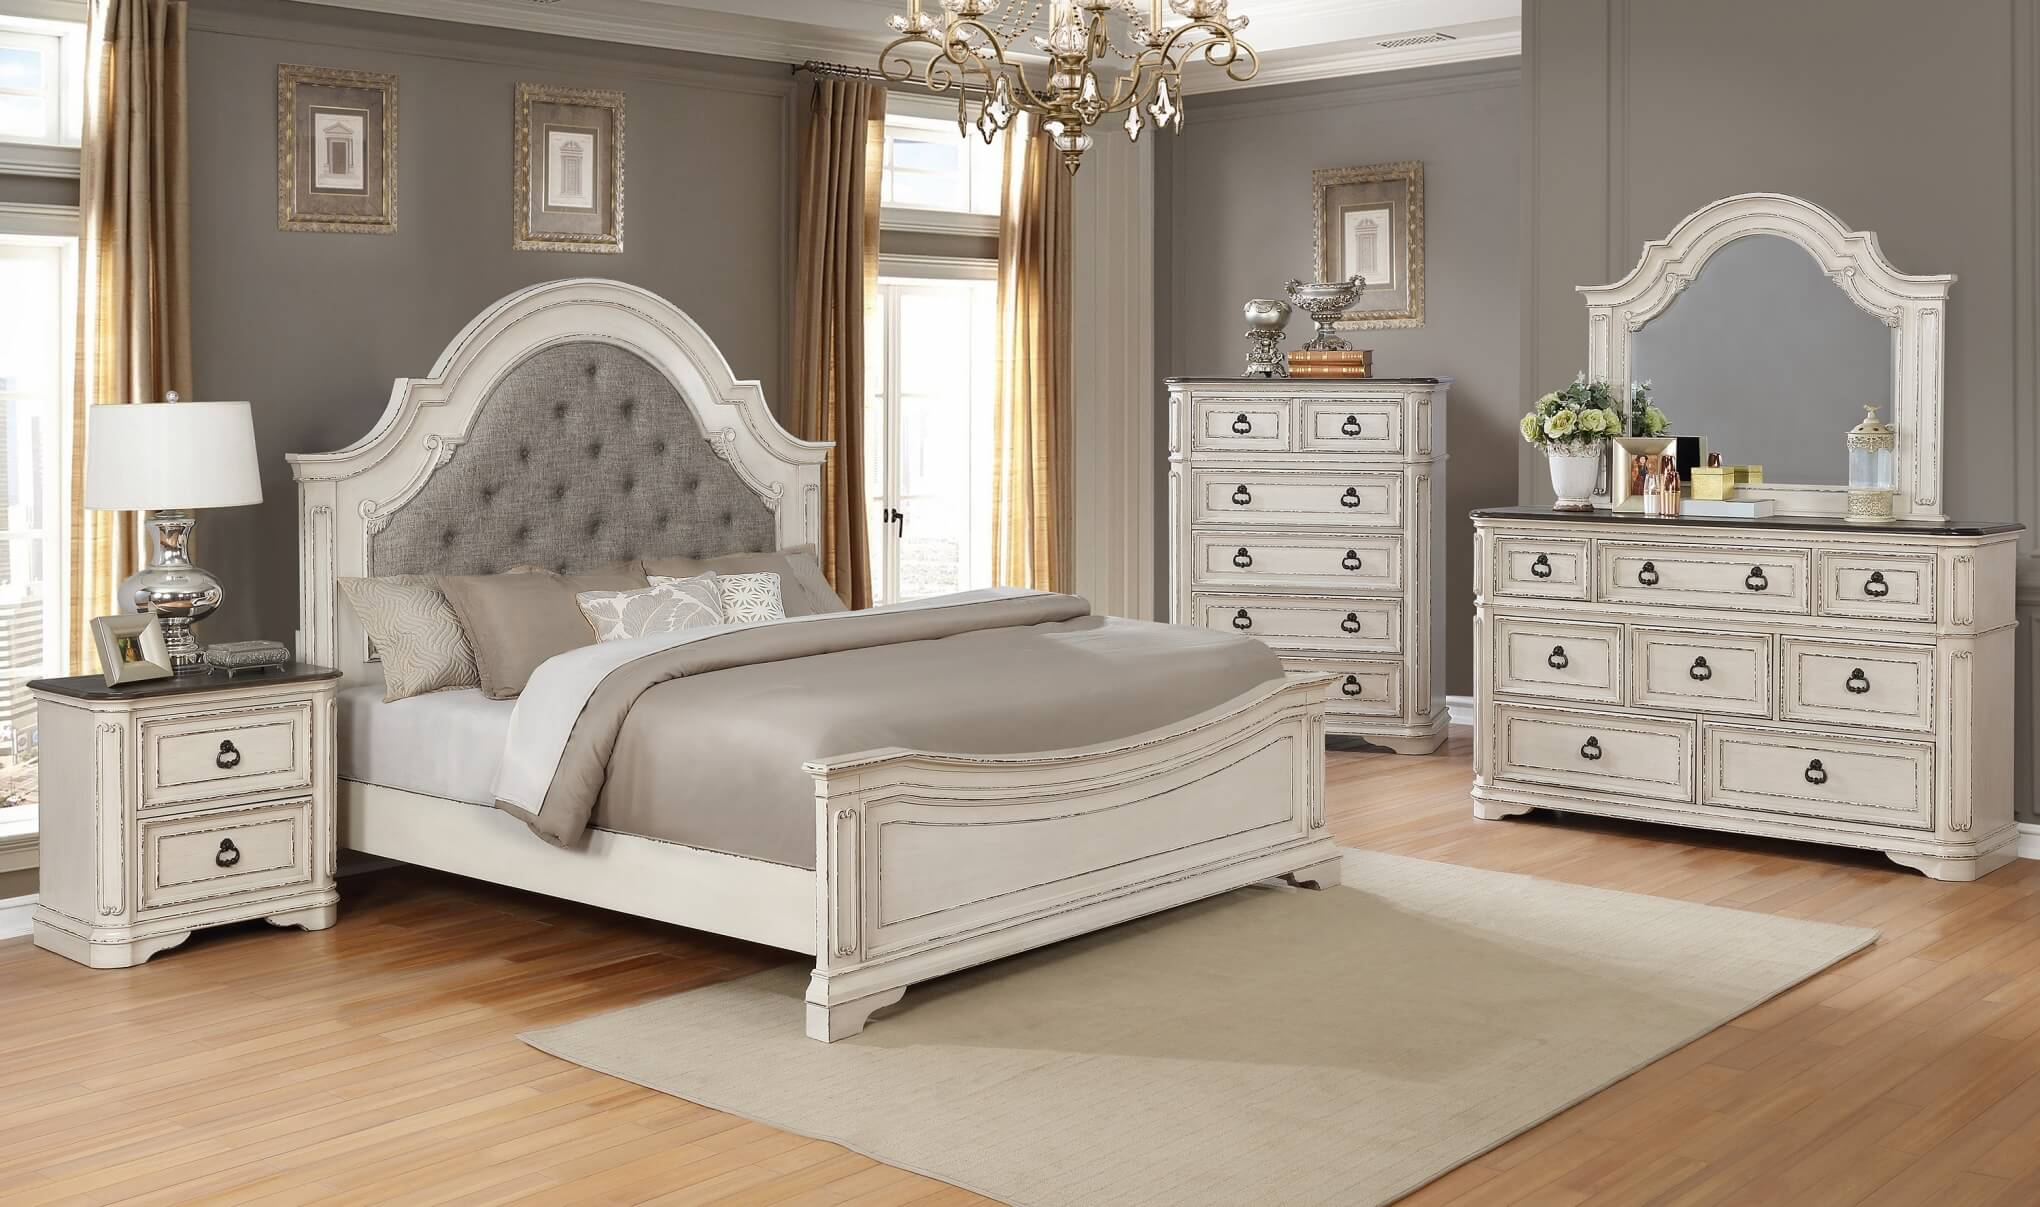 B1640 Magnolia Antique White Bedroom Set within proportions 2040 X 1207